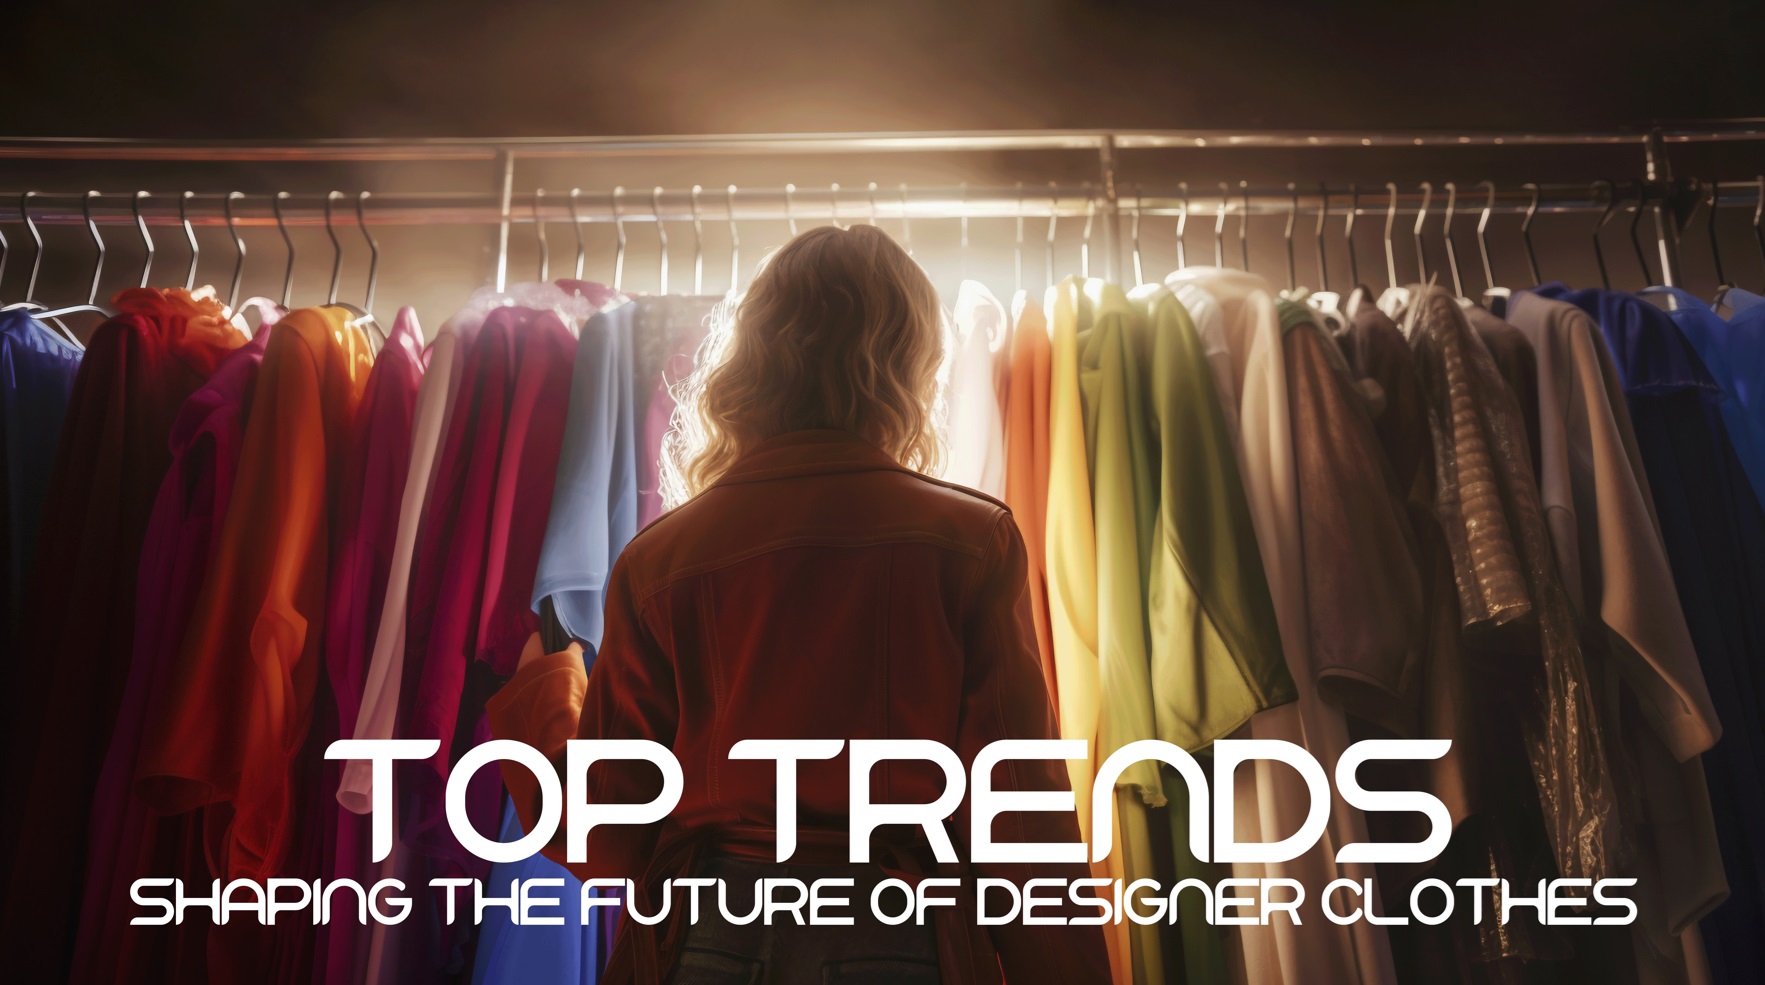 Top Trends Shaping the Future of Designer Clothes